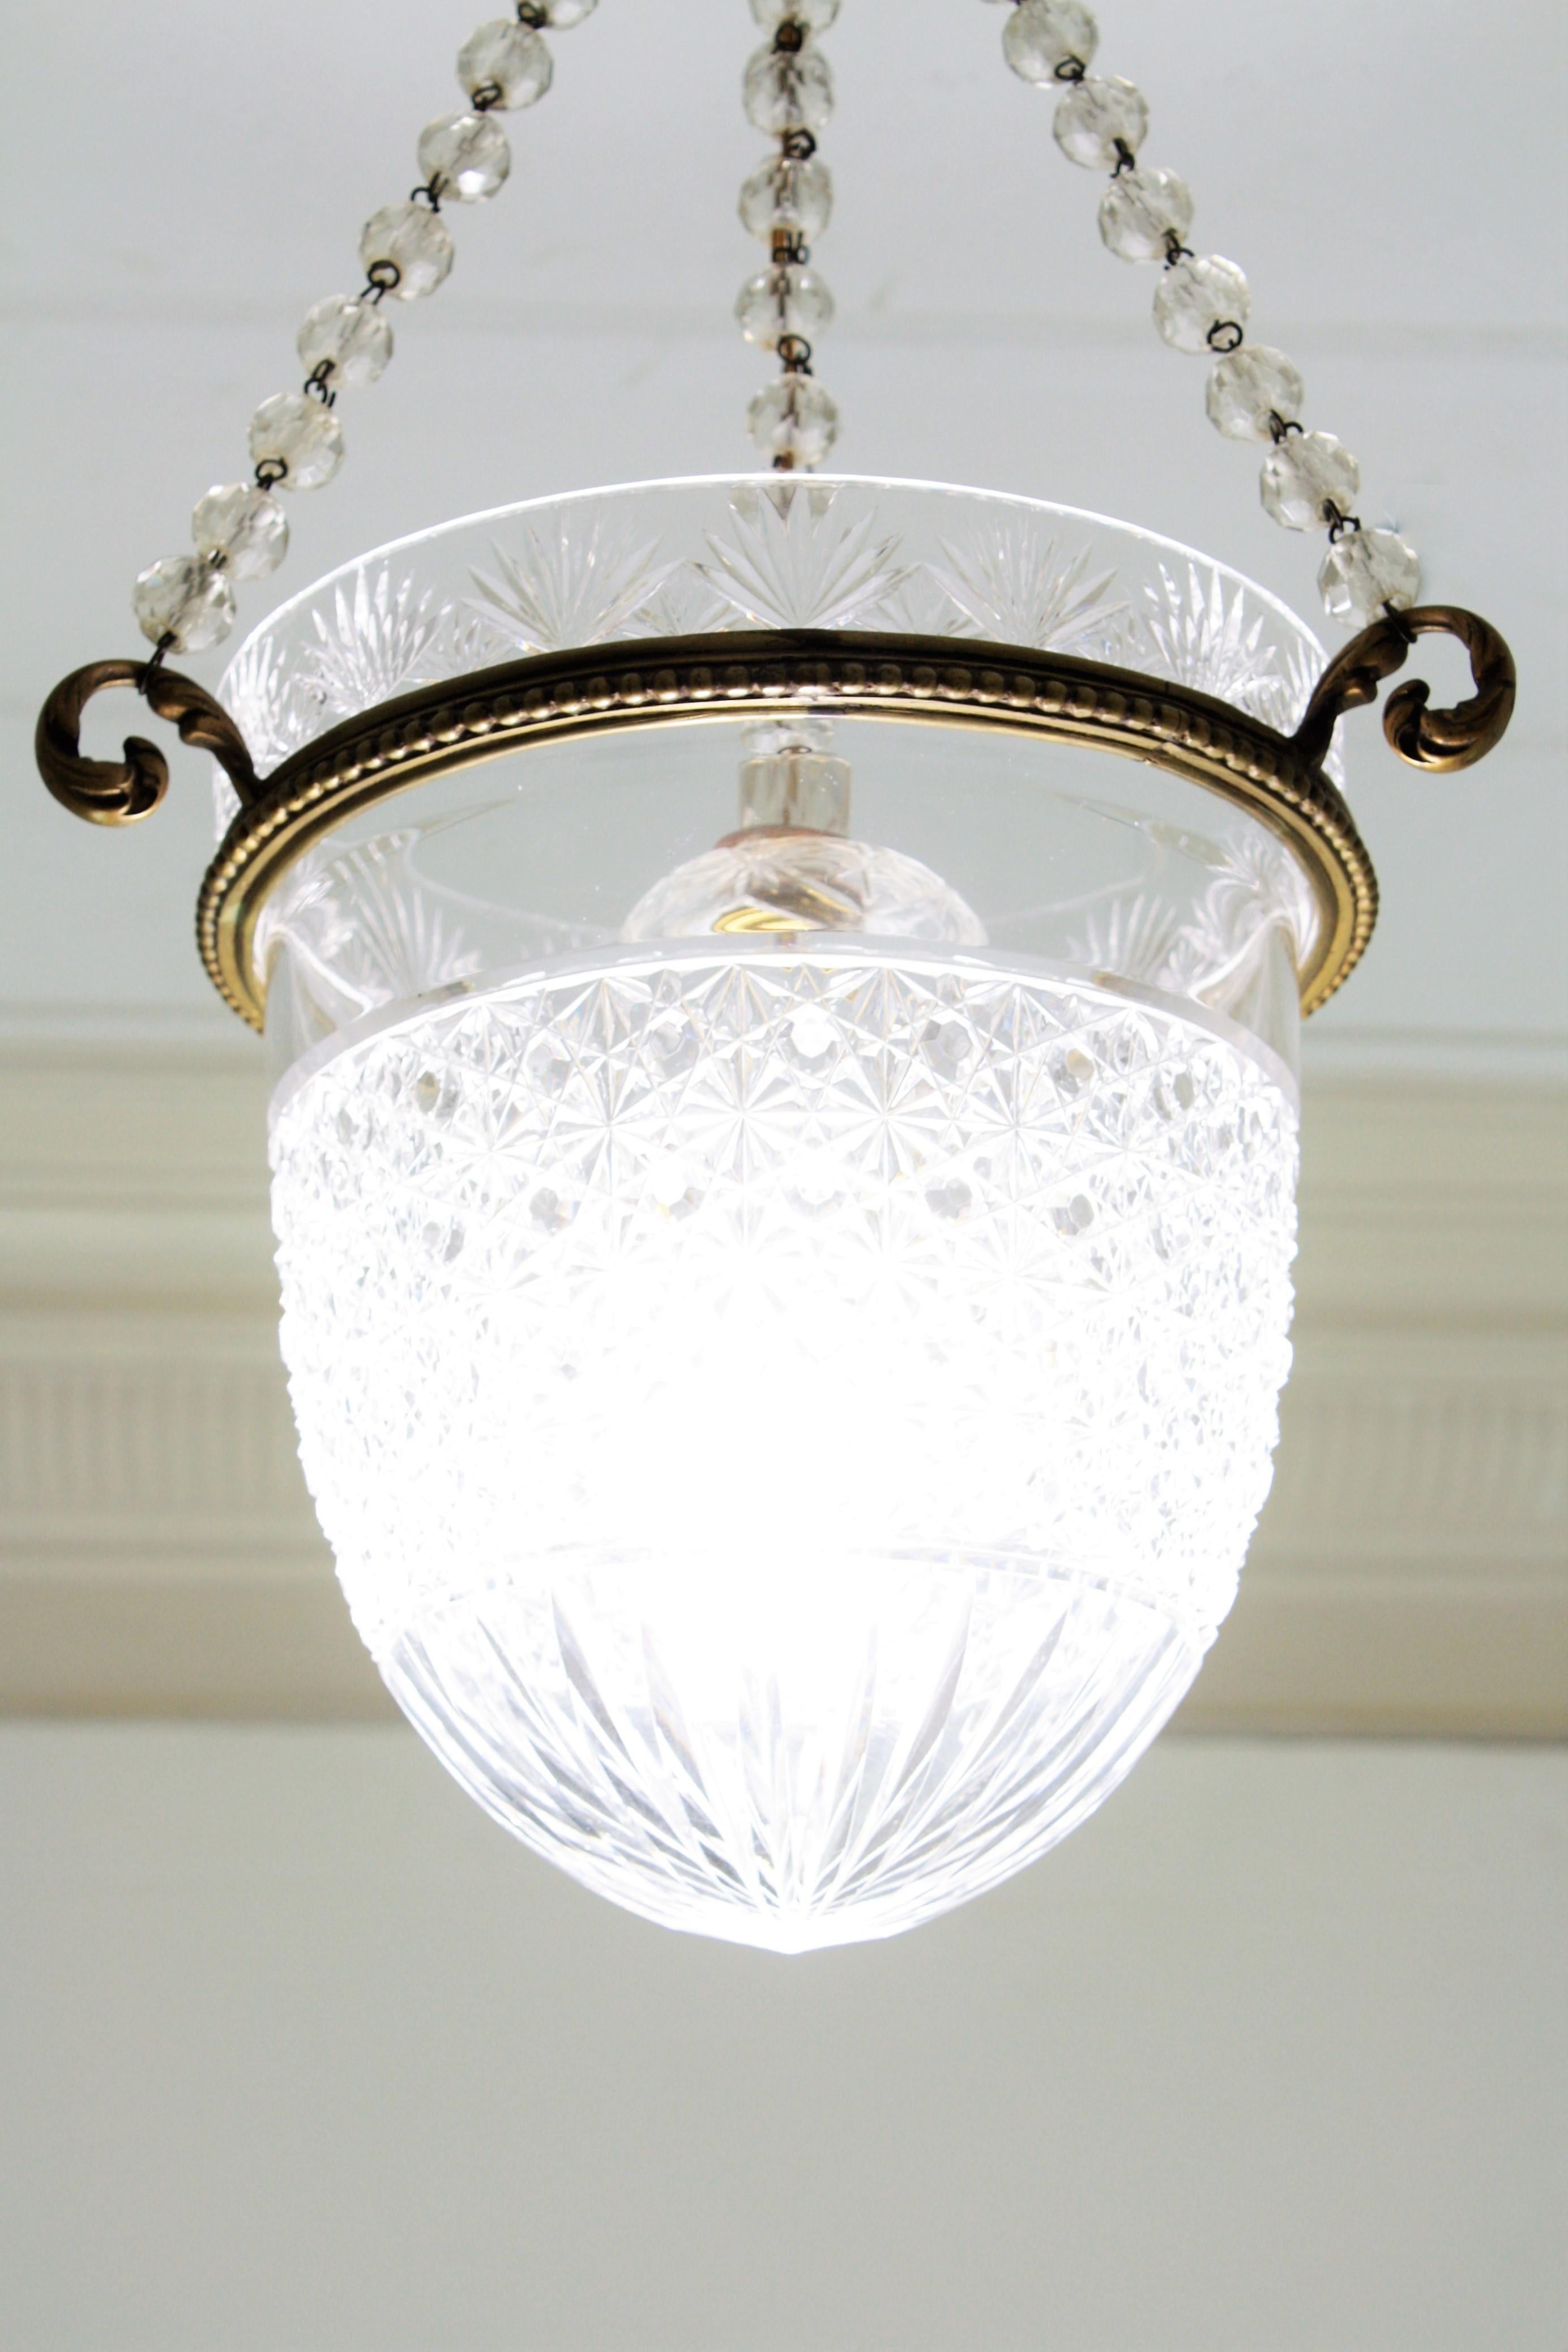 Bohemian Crystal Bell Jar Lantern or Pendant Light In Good Condition For Sale In Barcelona, ES